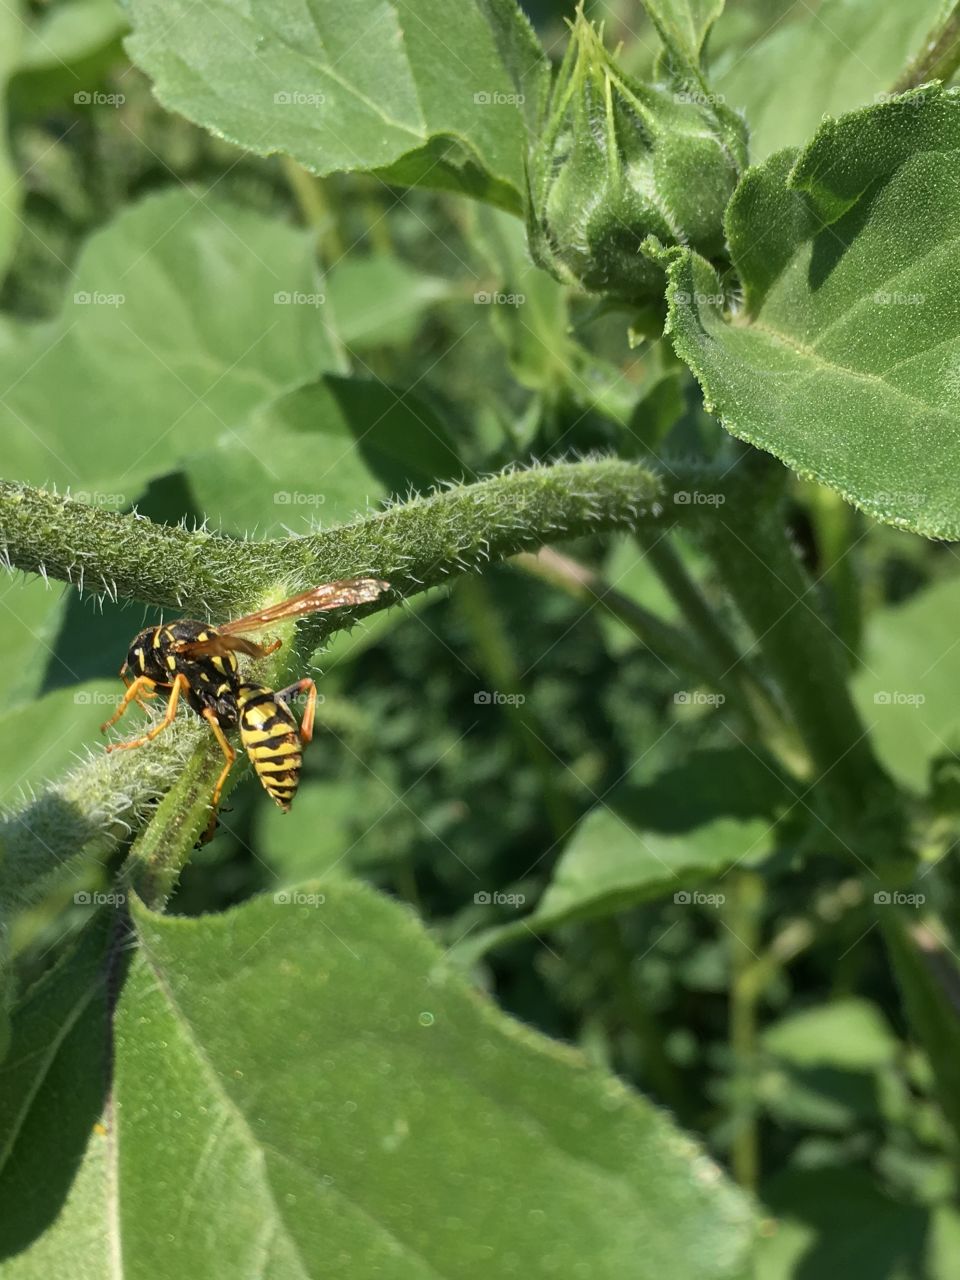 Wasp on a prickly stem.